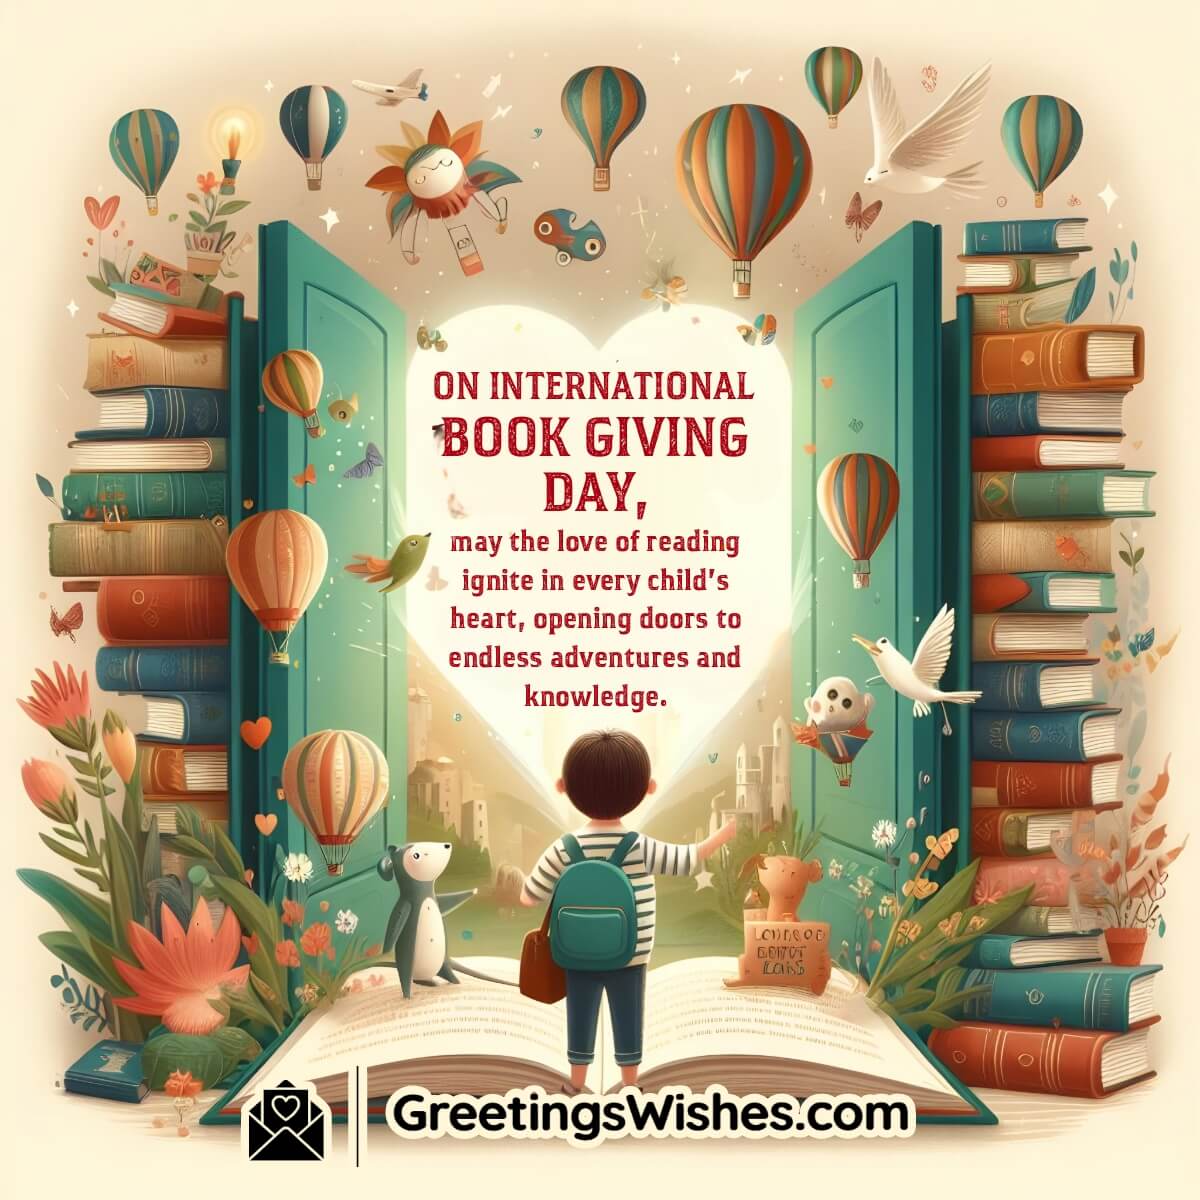 International Book Giving Day Wishes (14th February)